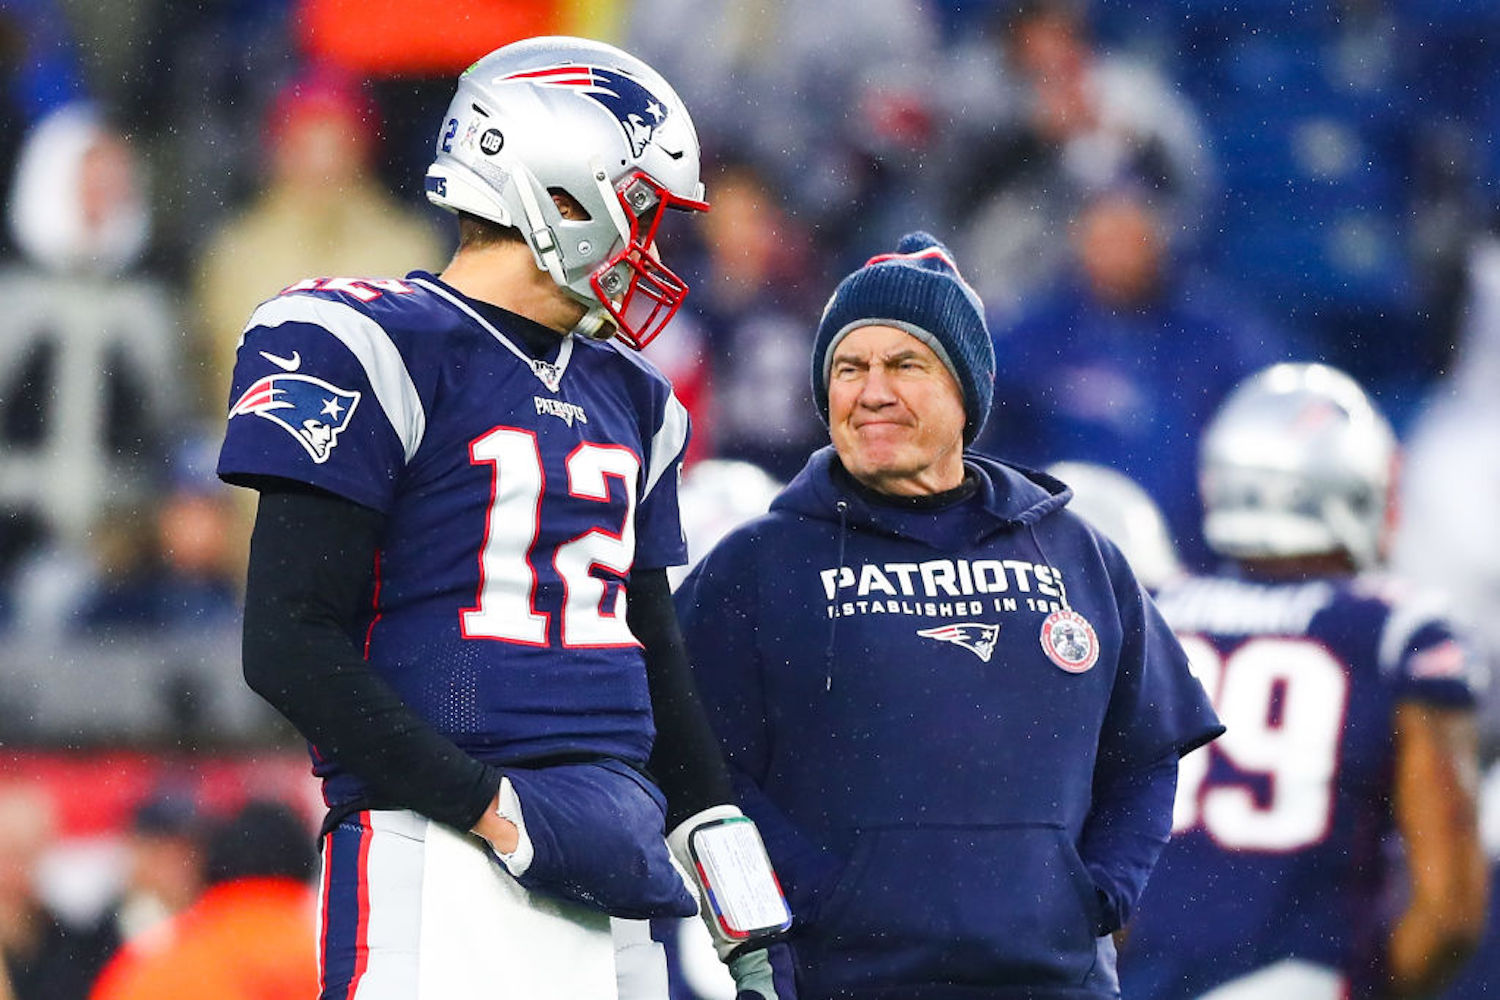 New England Patriots are opting out of the 2020 season left and right, but it could actually be a blessing in disguise for Bill Belichick.